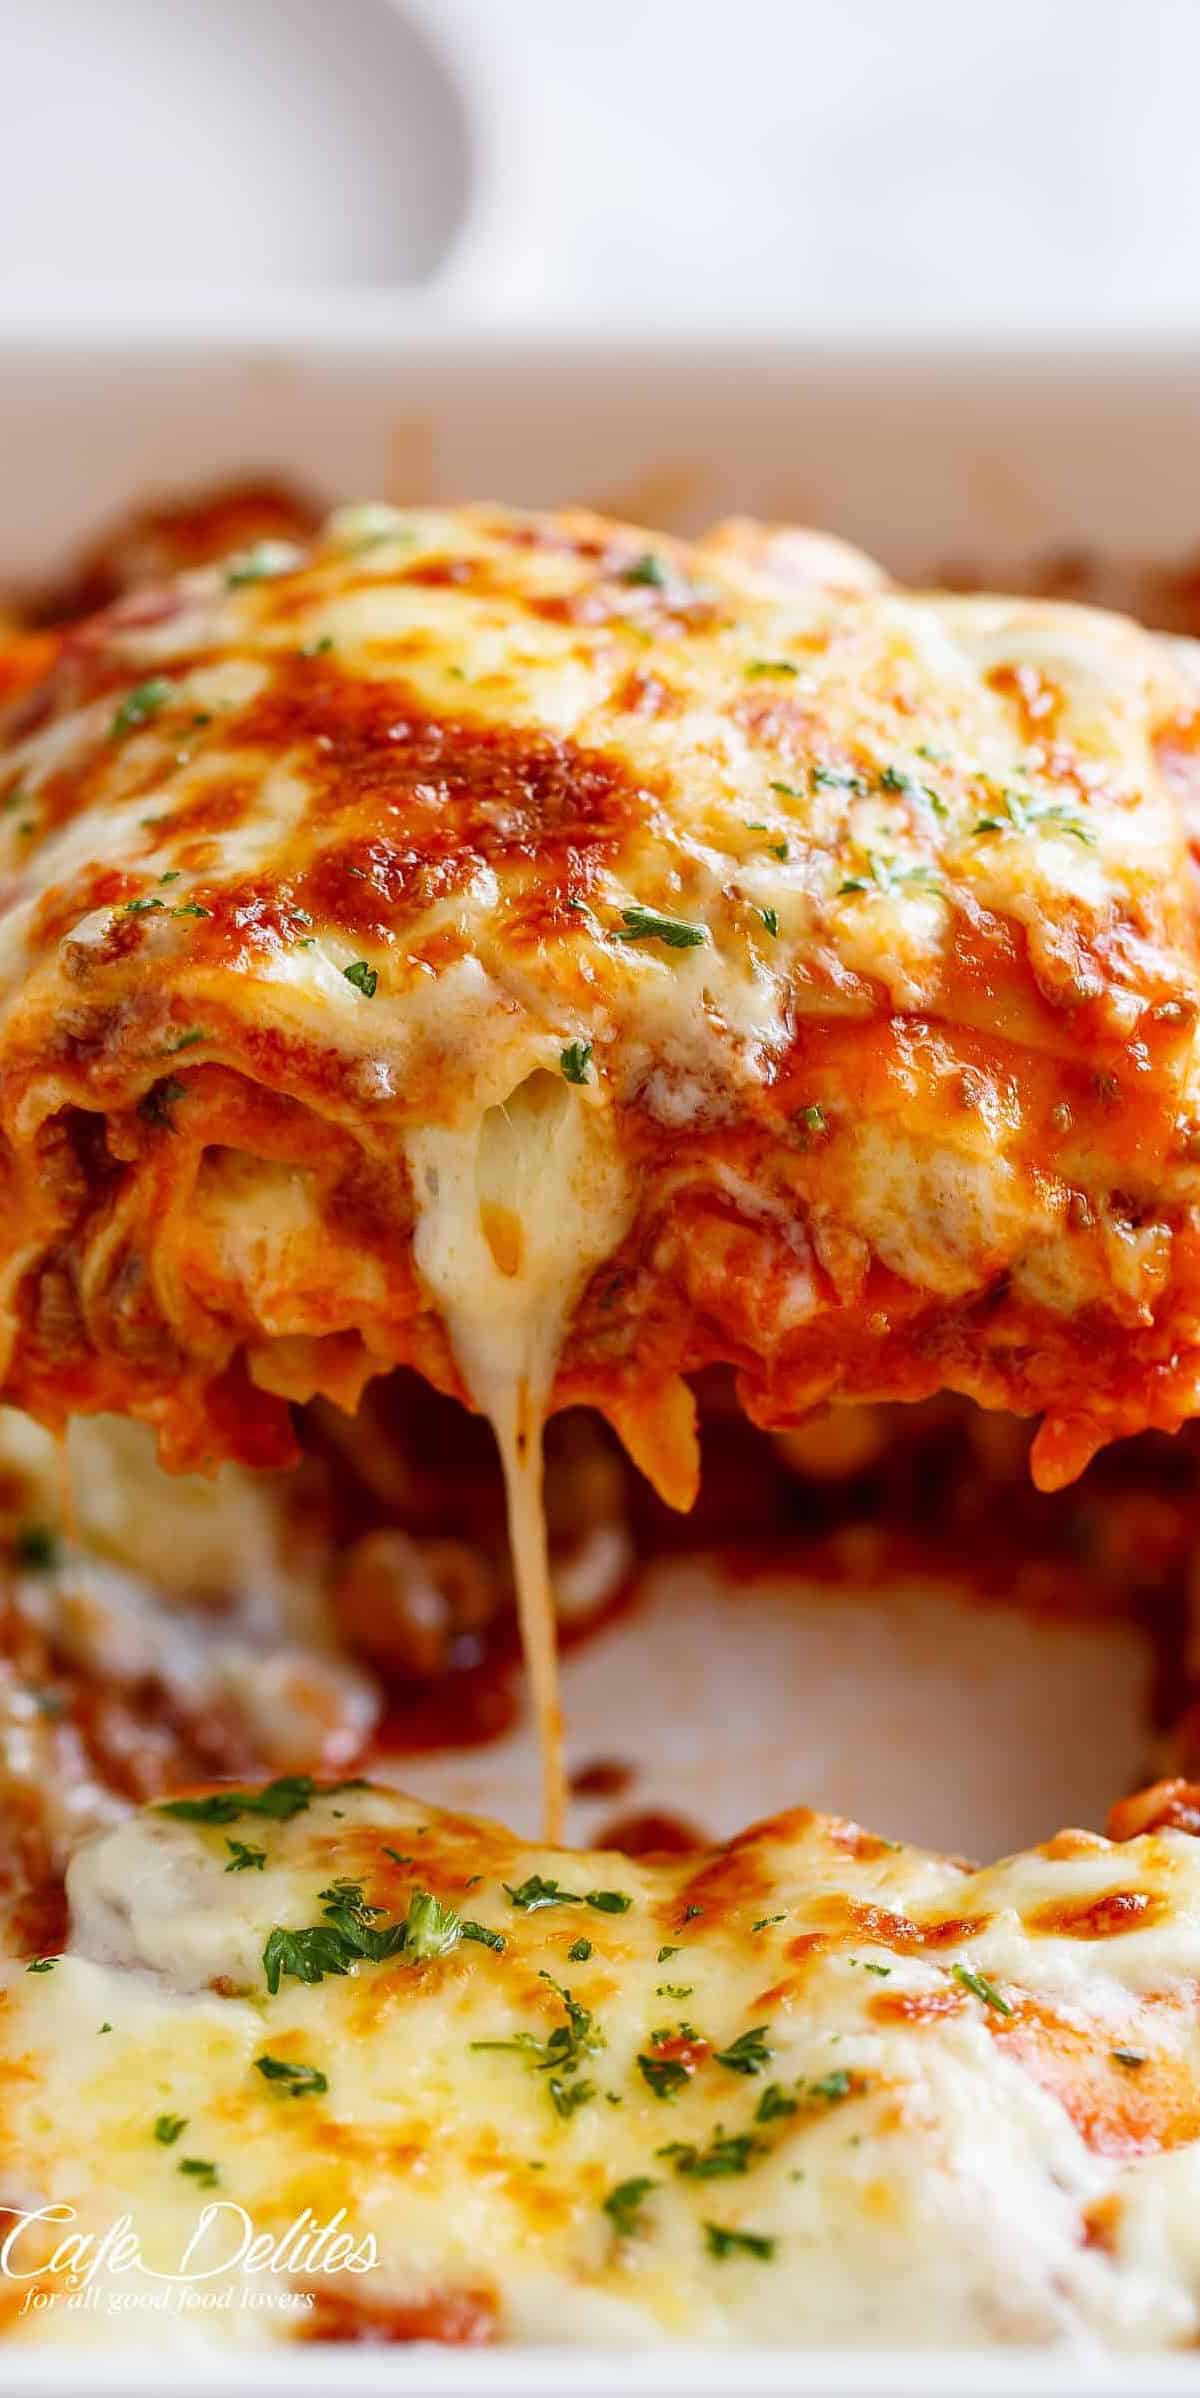  When in doubt, make this lasagna. It's a recipe for success.